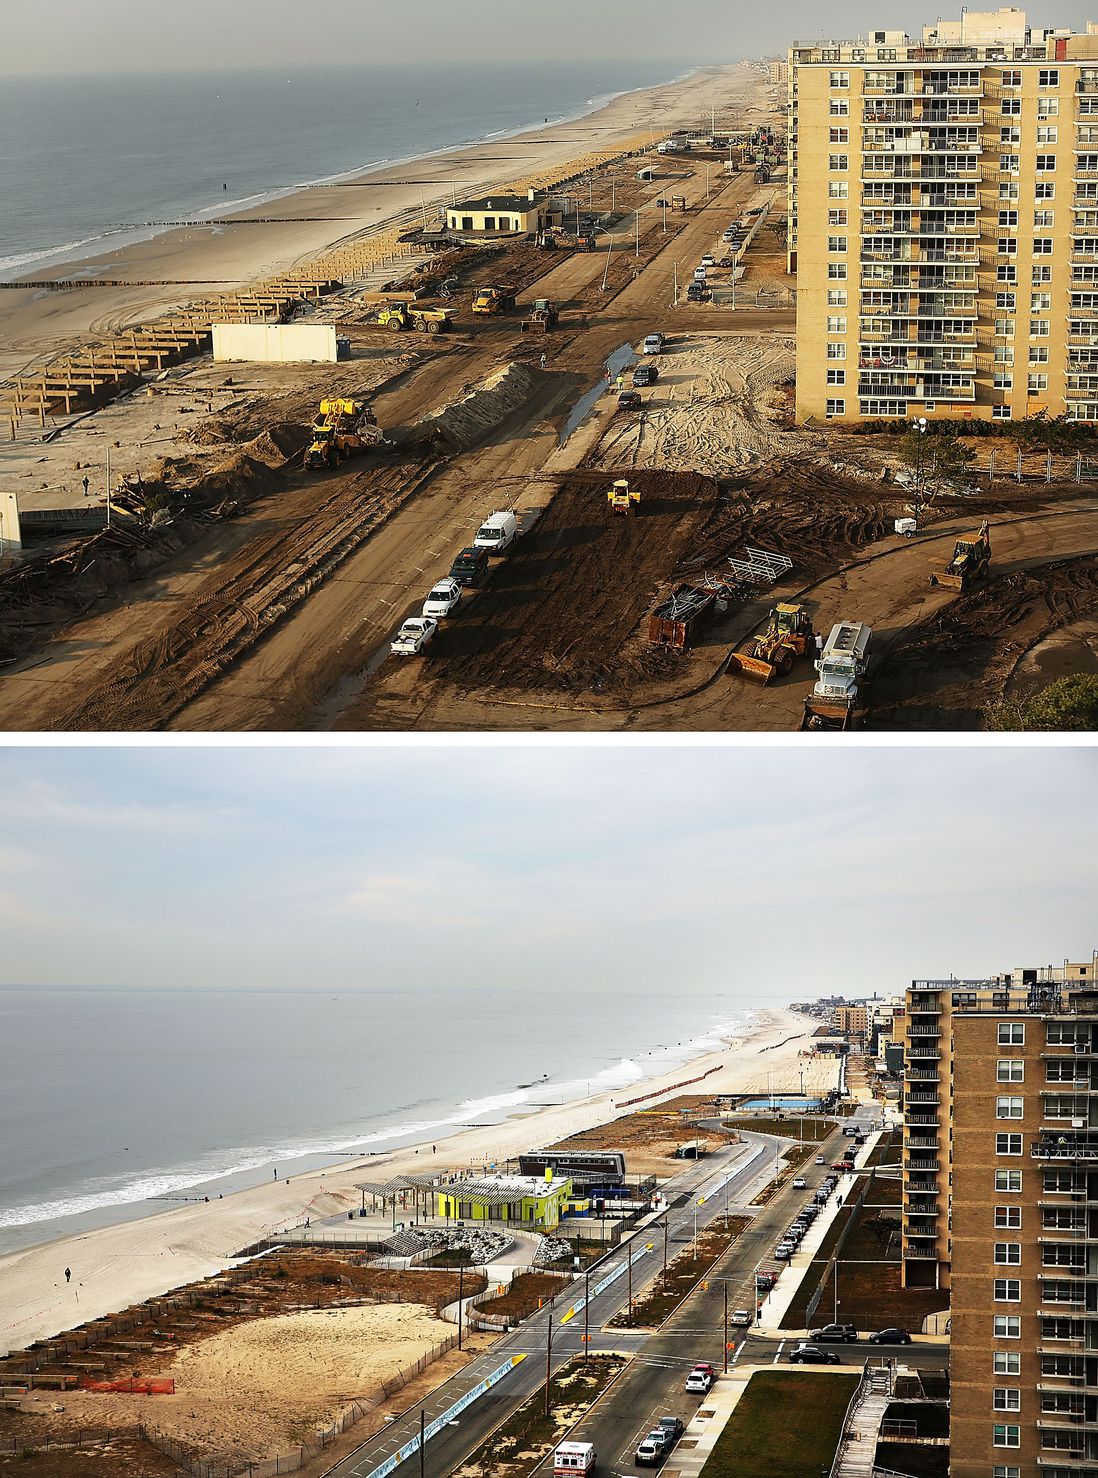 [Top] Clean-up continues amongst piles of debris where a large section of the iconic boardwalk was washed away on November 10, 2012 in the Rockaway neighborhood of the Queens borough of New York City. [Bottom] Cars sit parked on the street October 20, 2013.